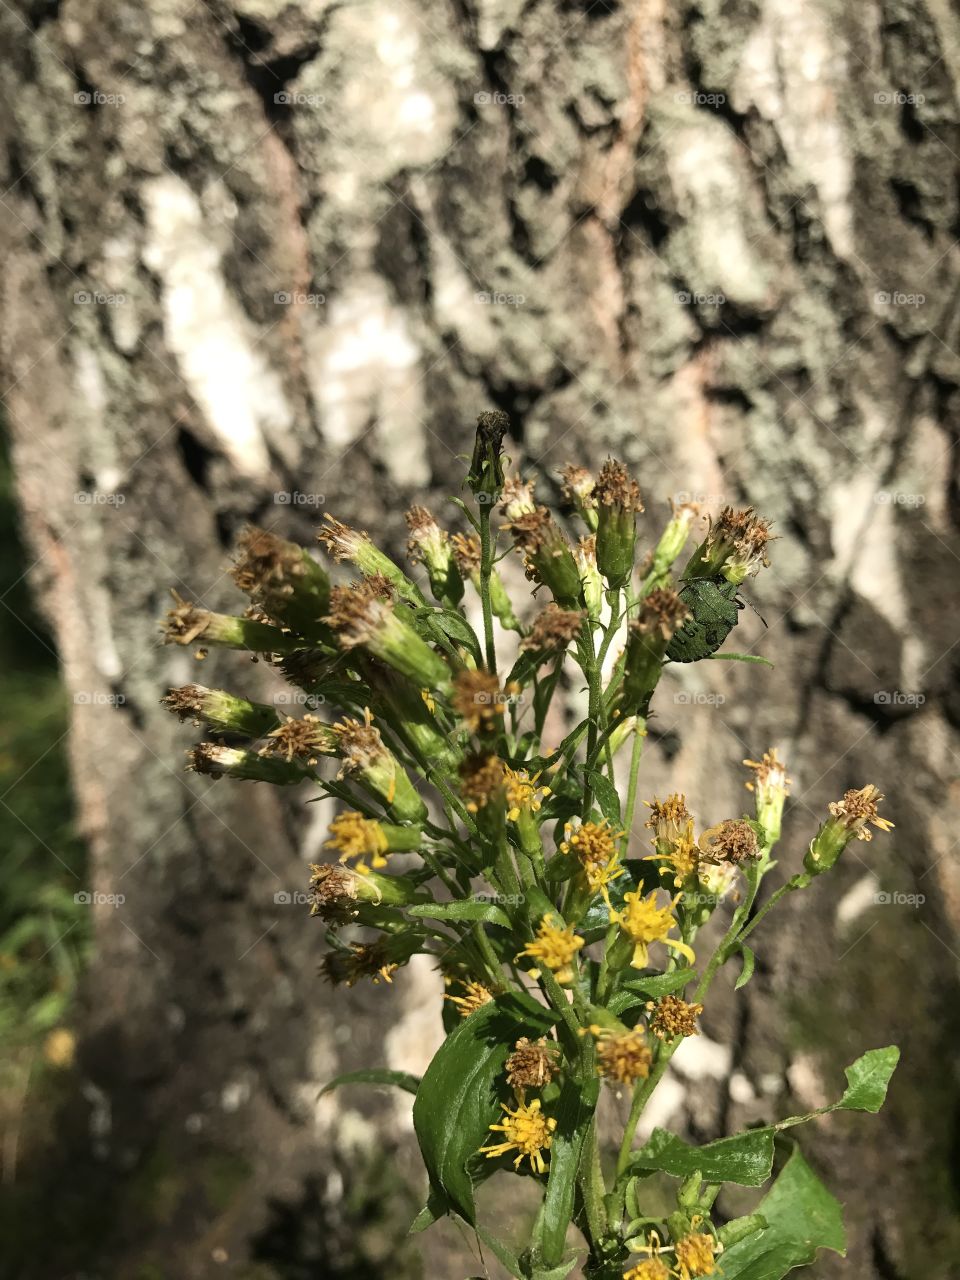 Bark with flowers 